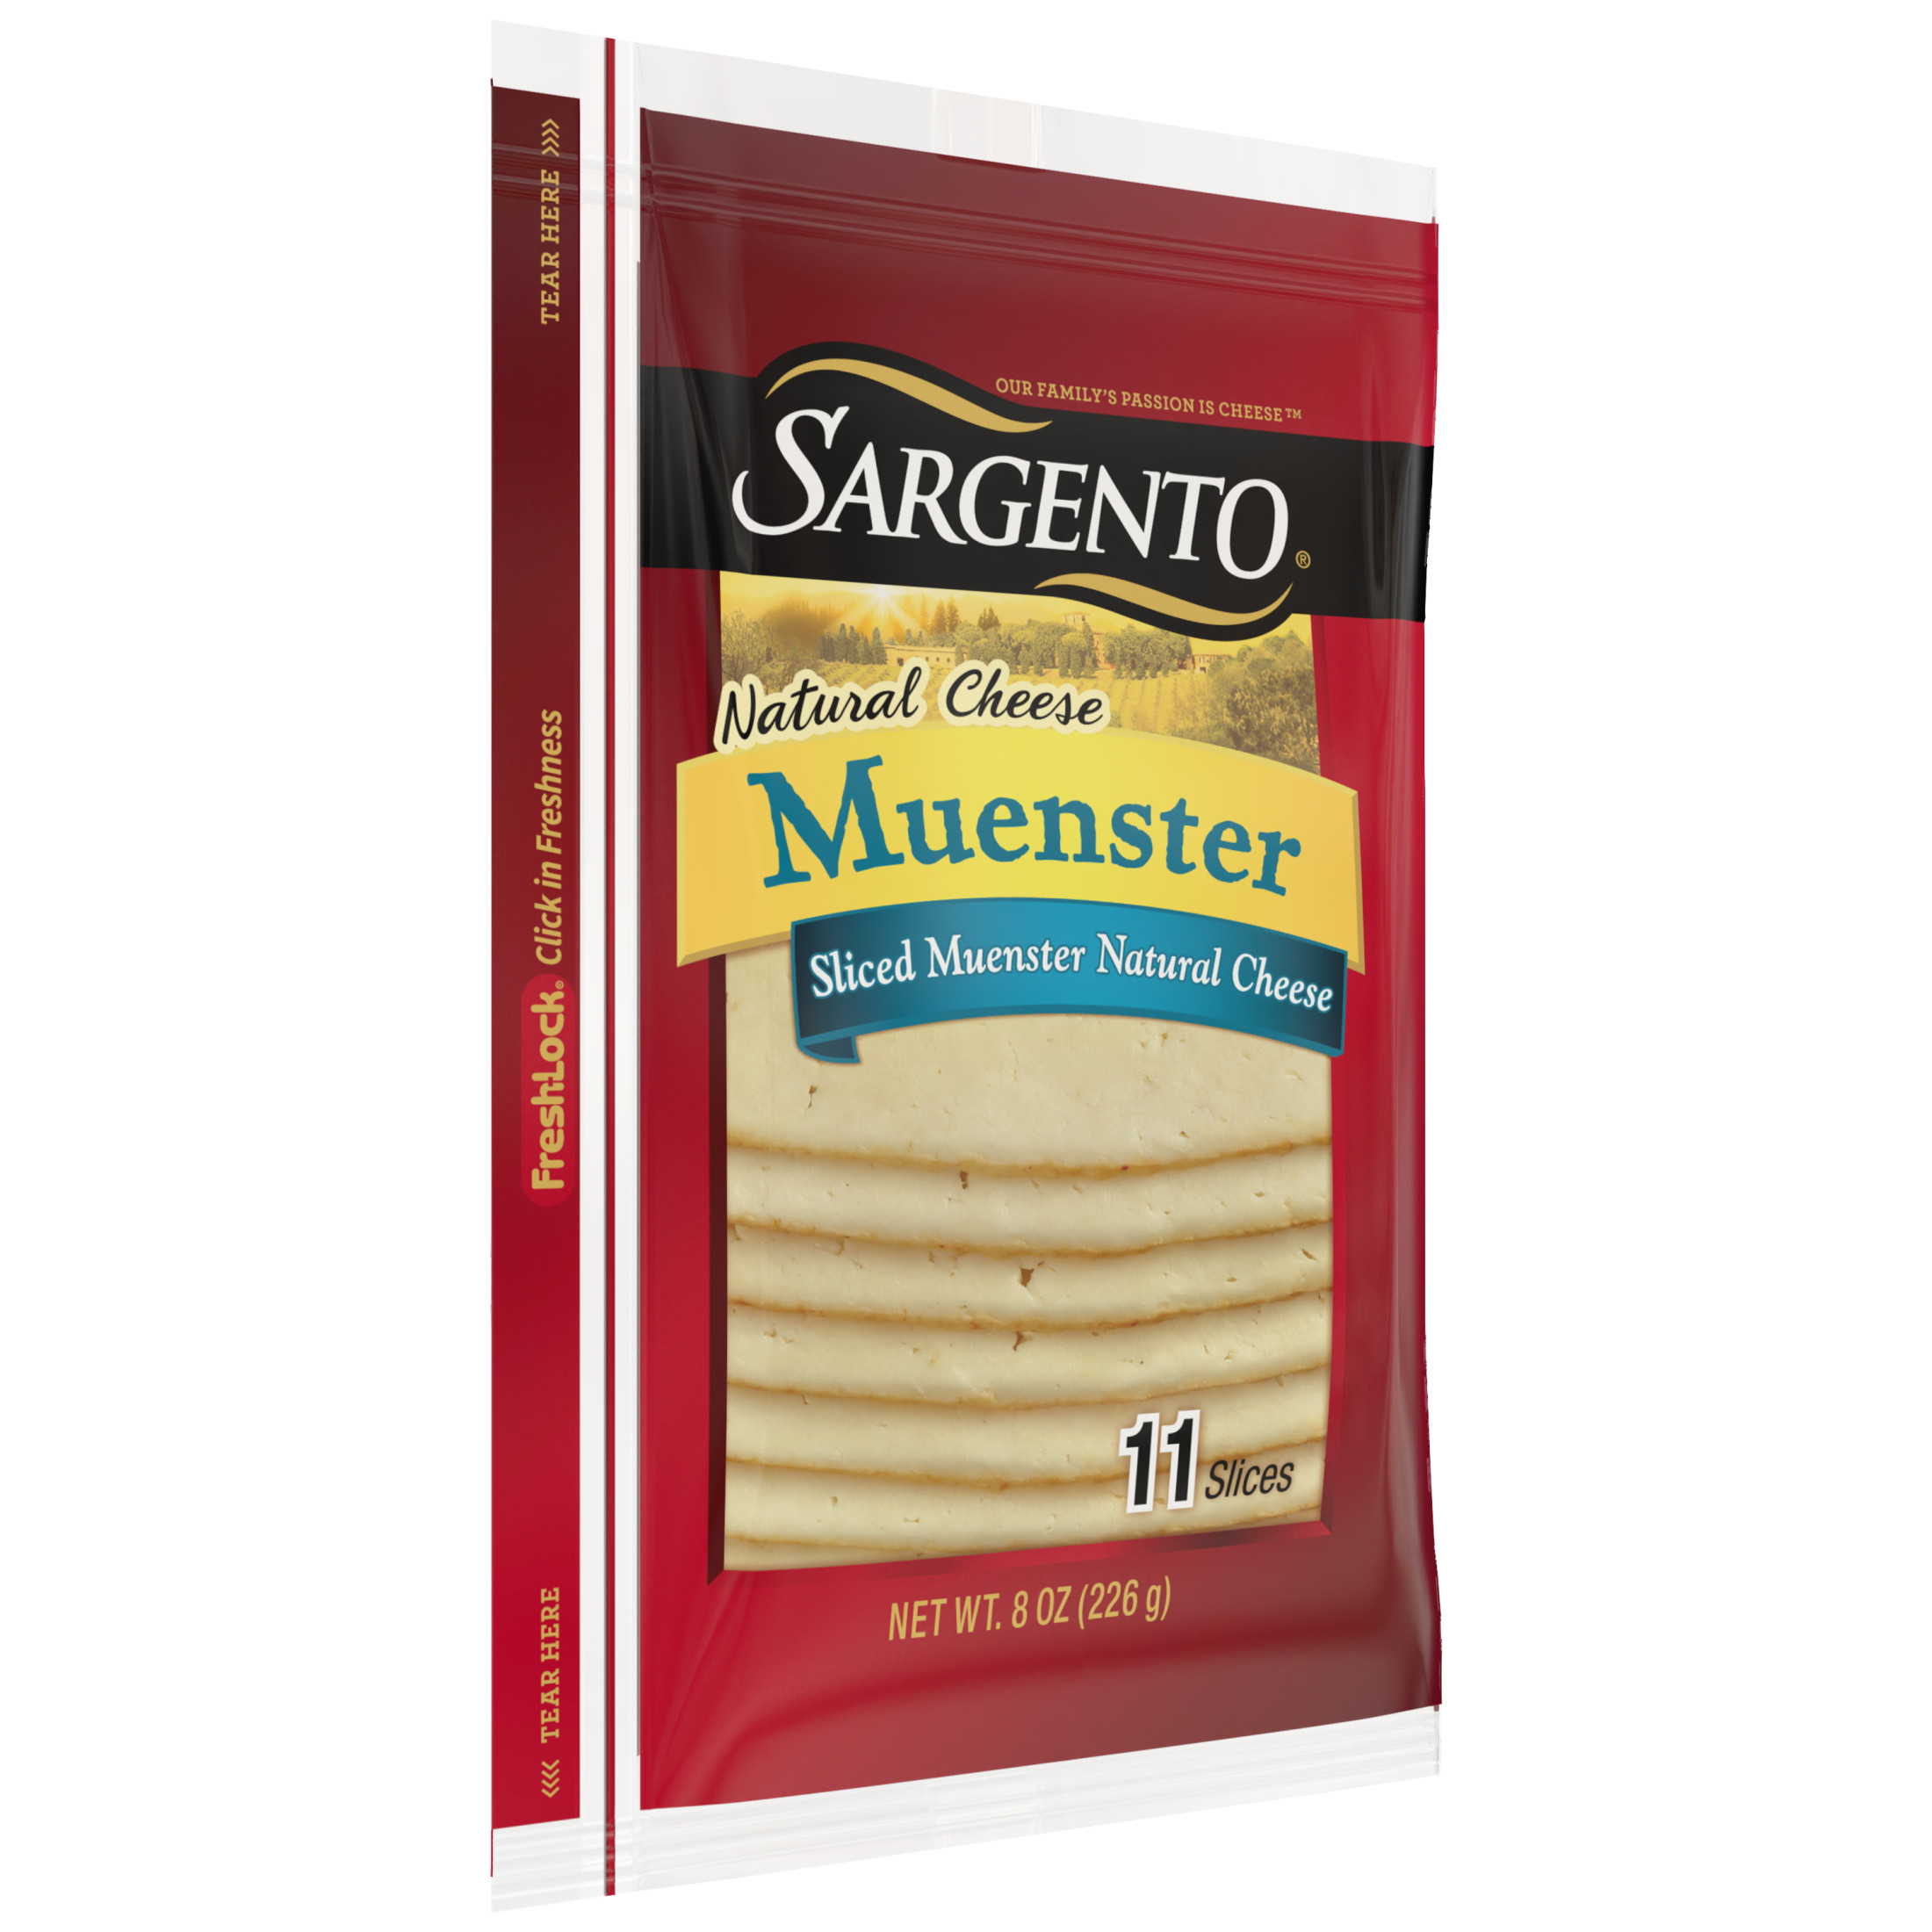 Sargento® Sliced Muenster Natural Cheese, 11 Slices - image 4 of 6